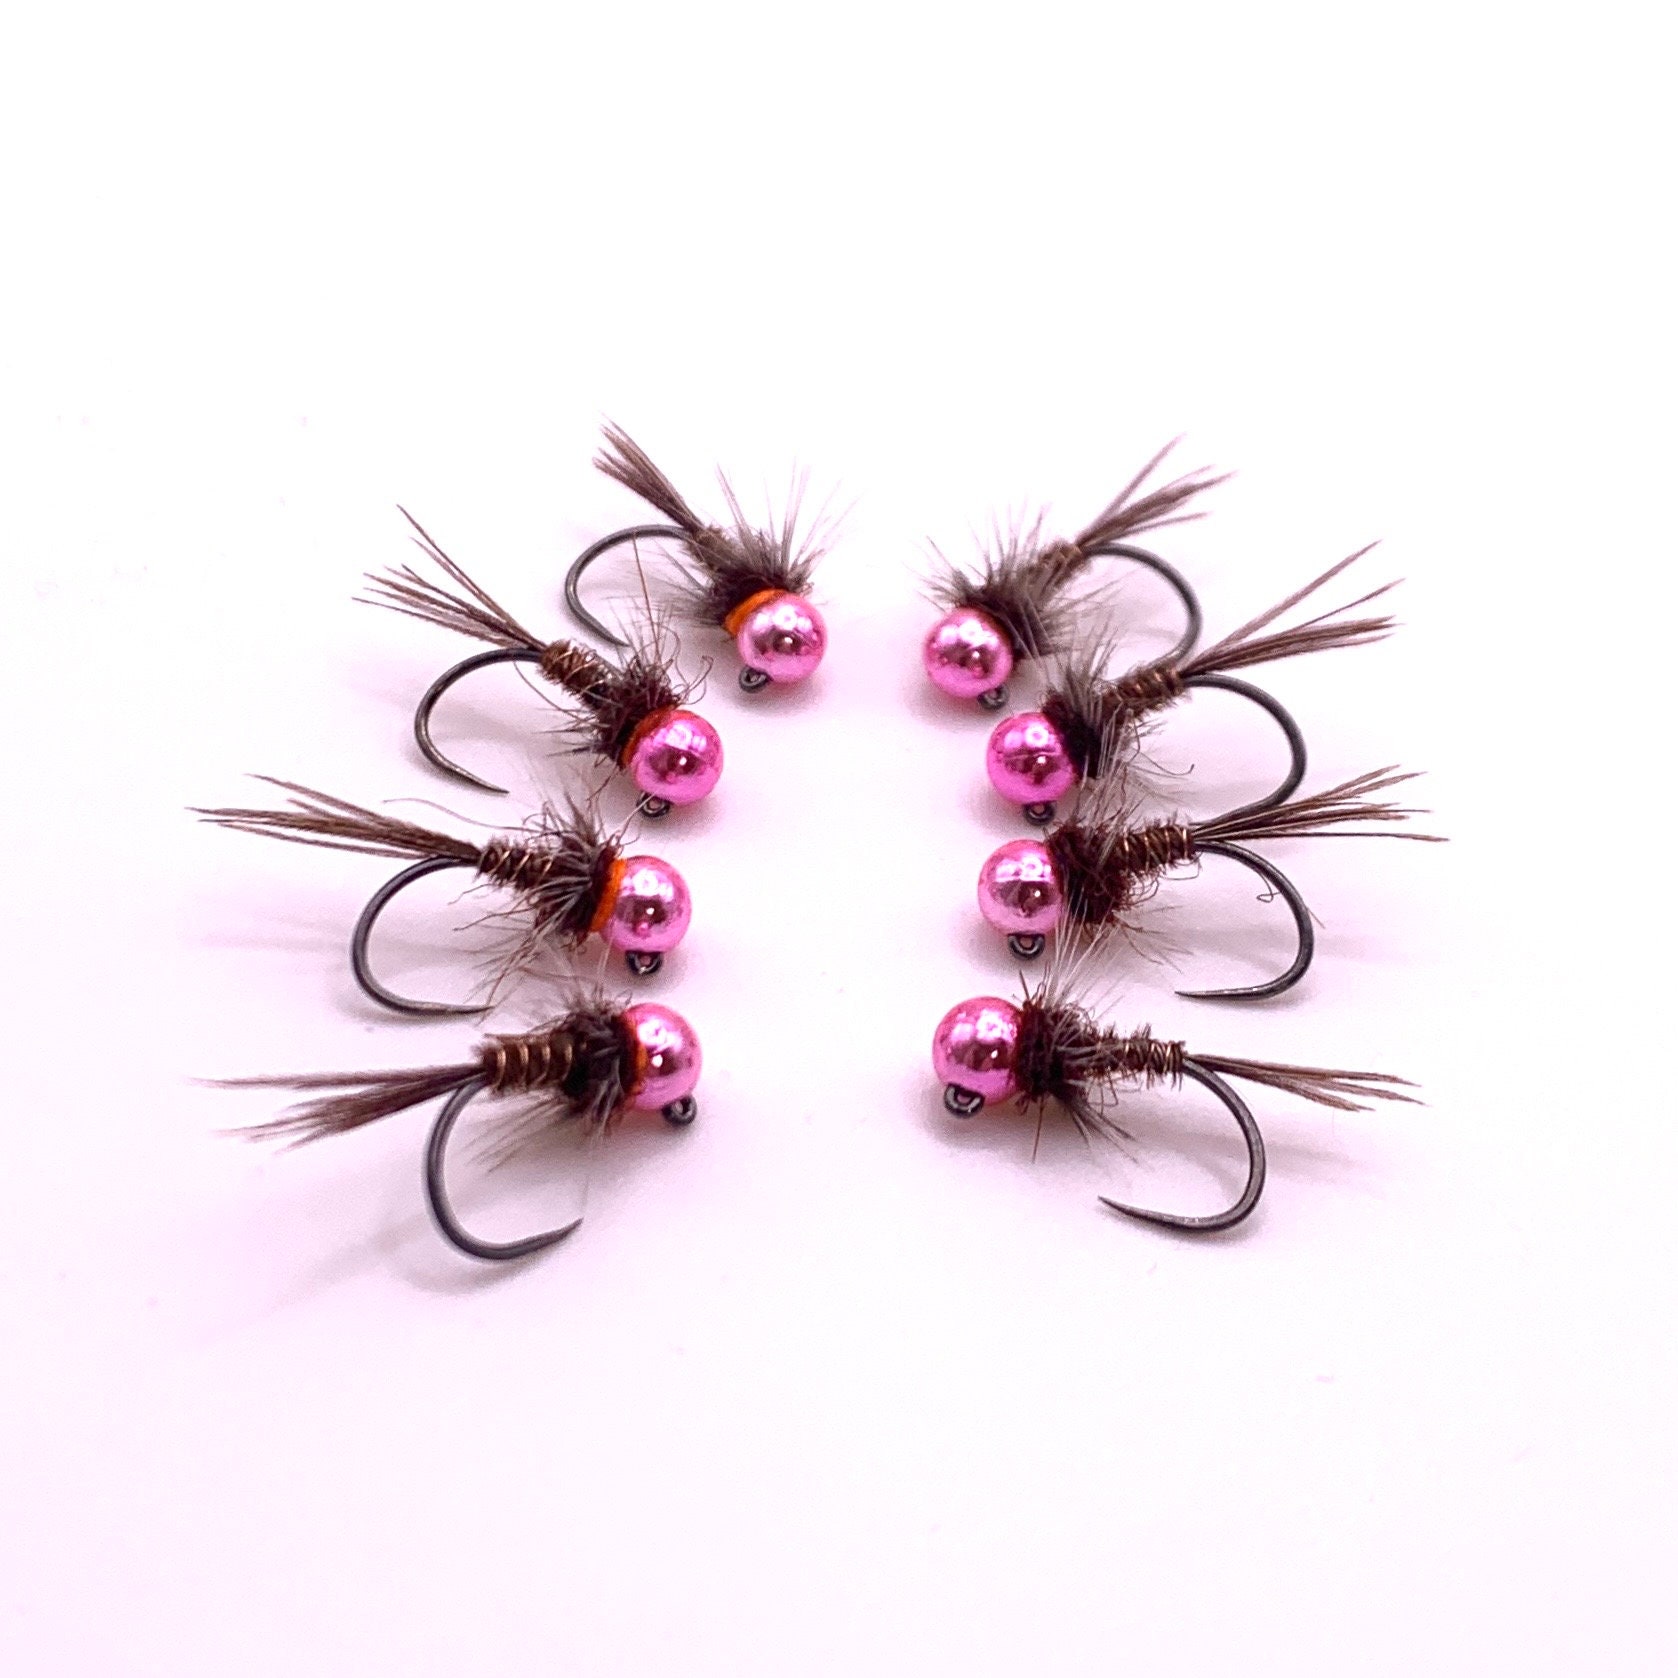 4 Soft Hackle Hare's Ear Wet Flies. Nymphs. Trout Flies. Colorado Fly  Fishing Flies. Best Soft Hackle. Barbless. 